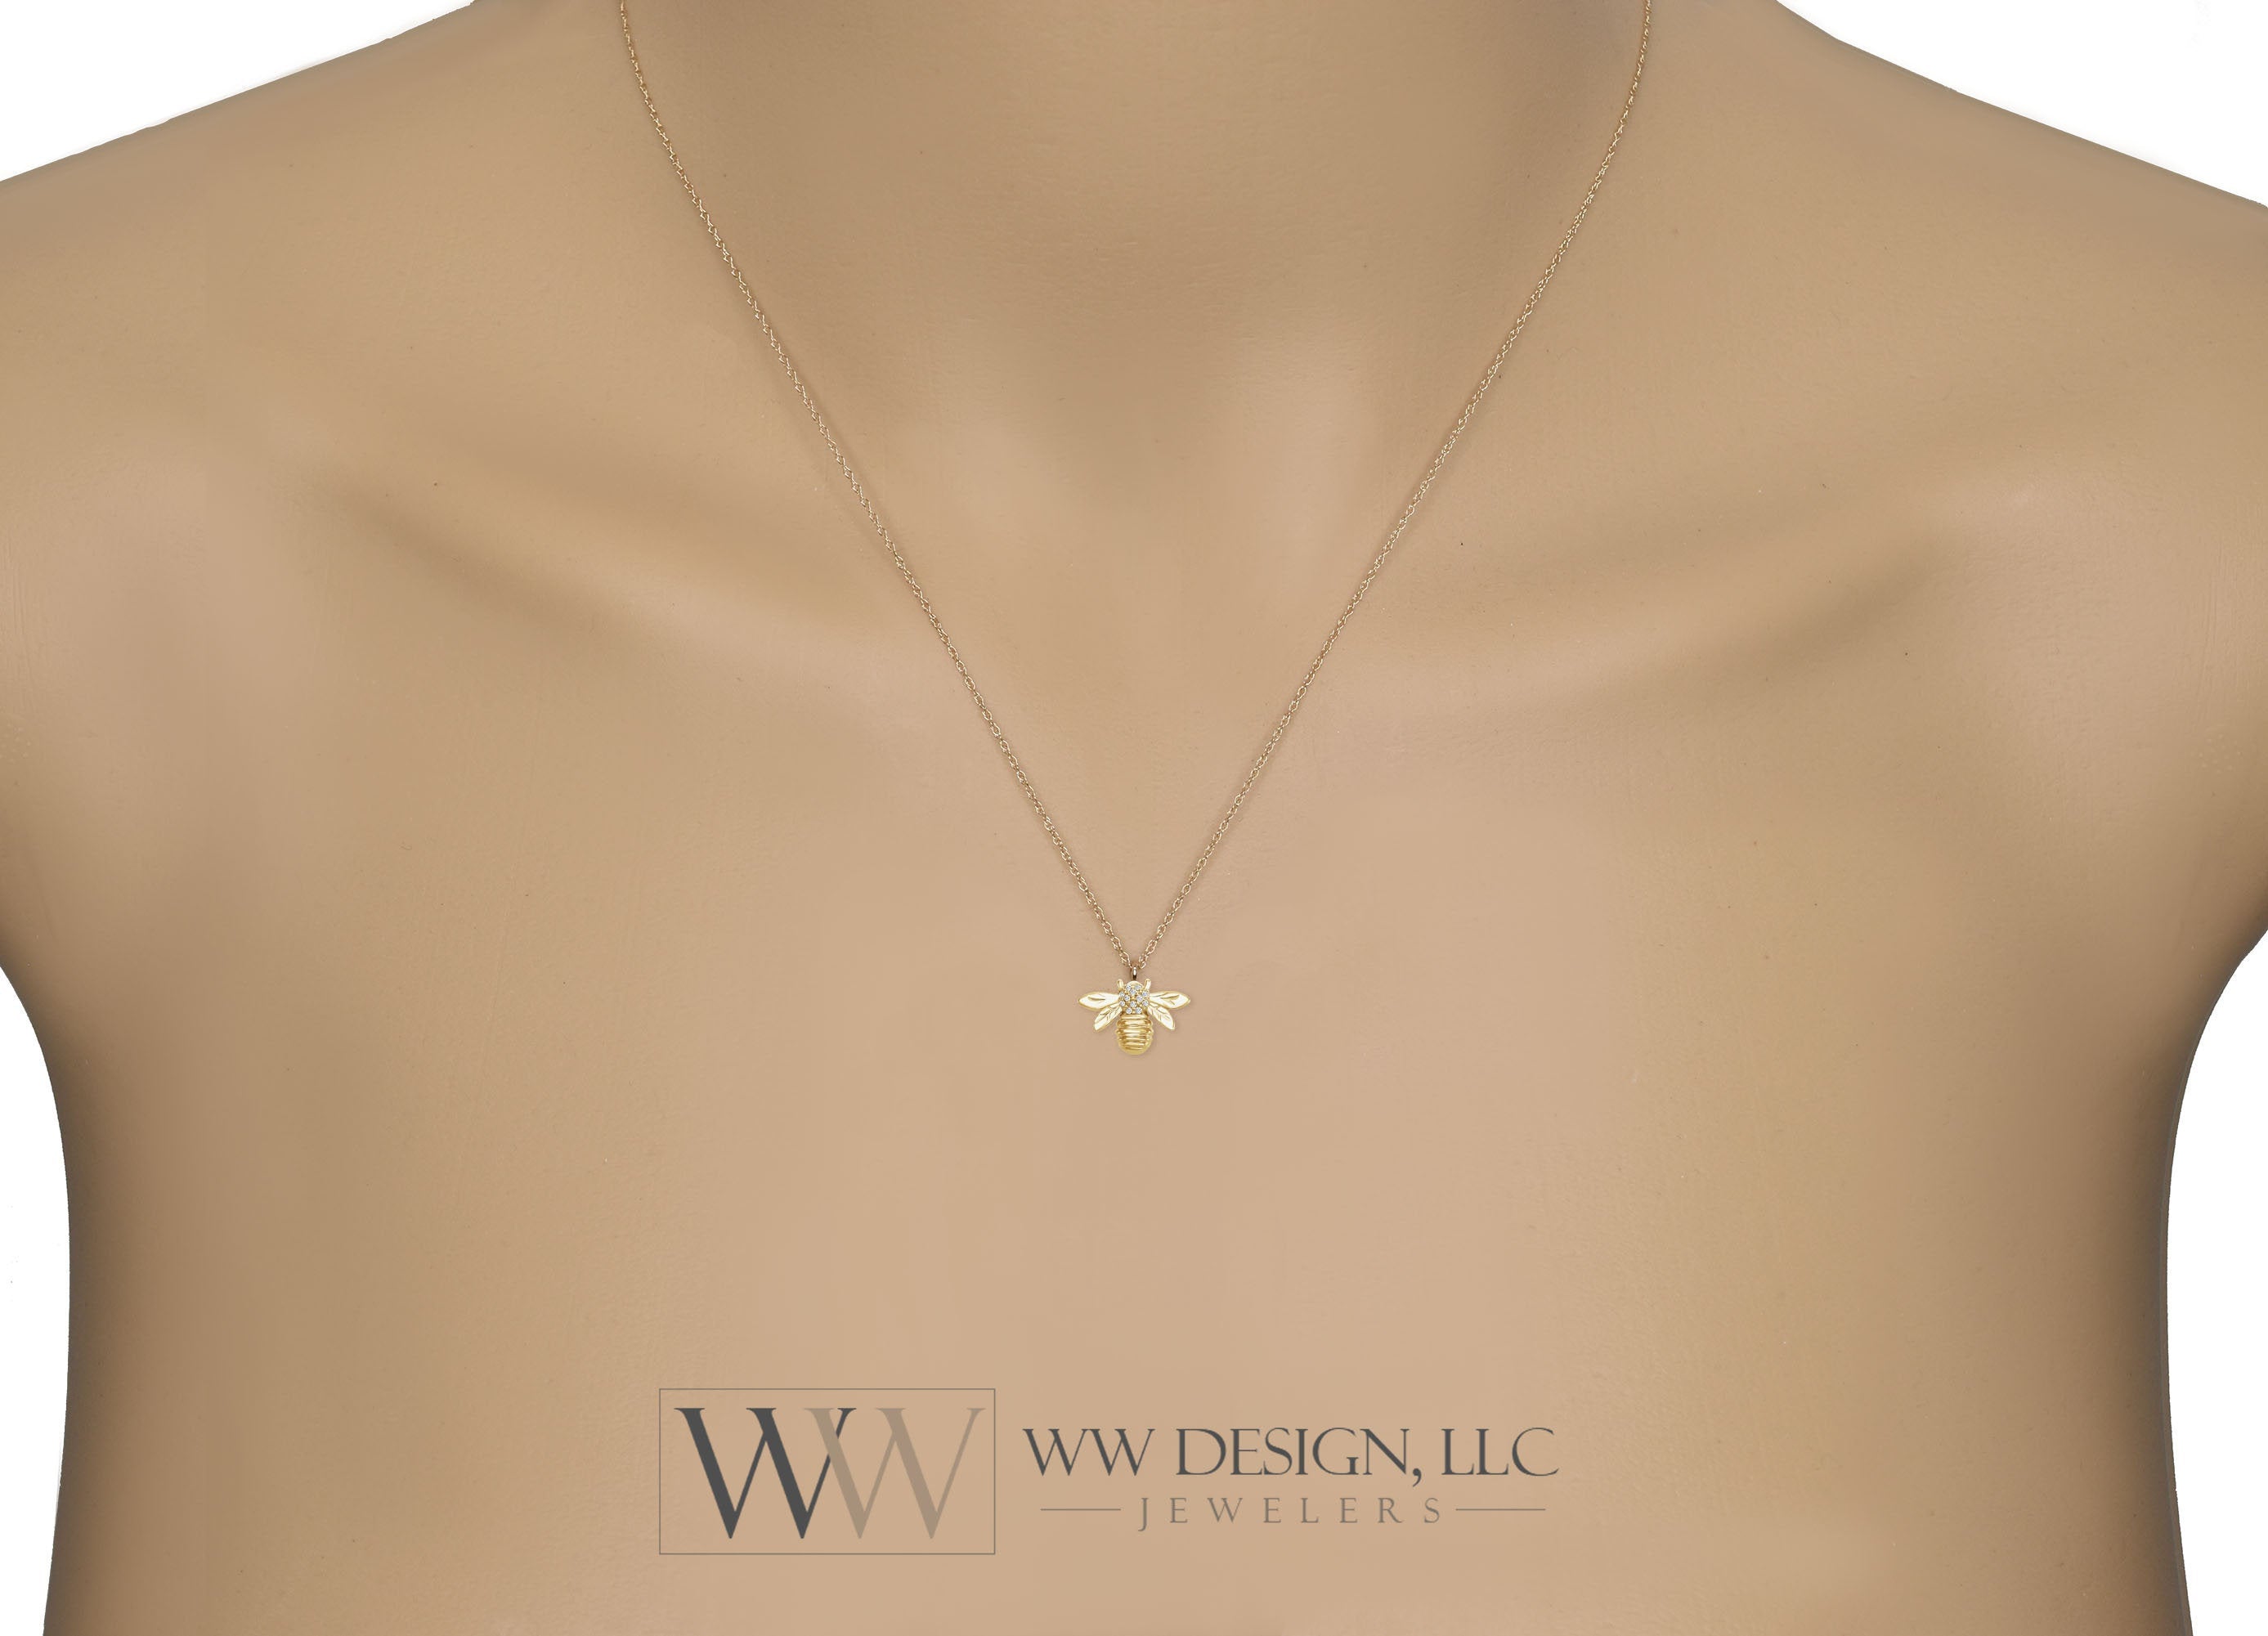 Bumble Bee Diamond 0.03 ctw Pendant Necklace 14k Solid Gold, 14k Rose Gold, 14k White Gold Christmas 12.2mm x 8.4mm Honey Bee Diamond charm